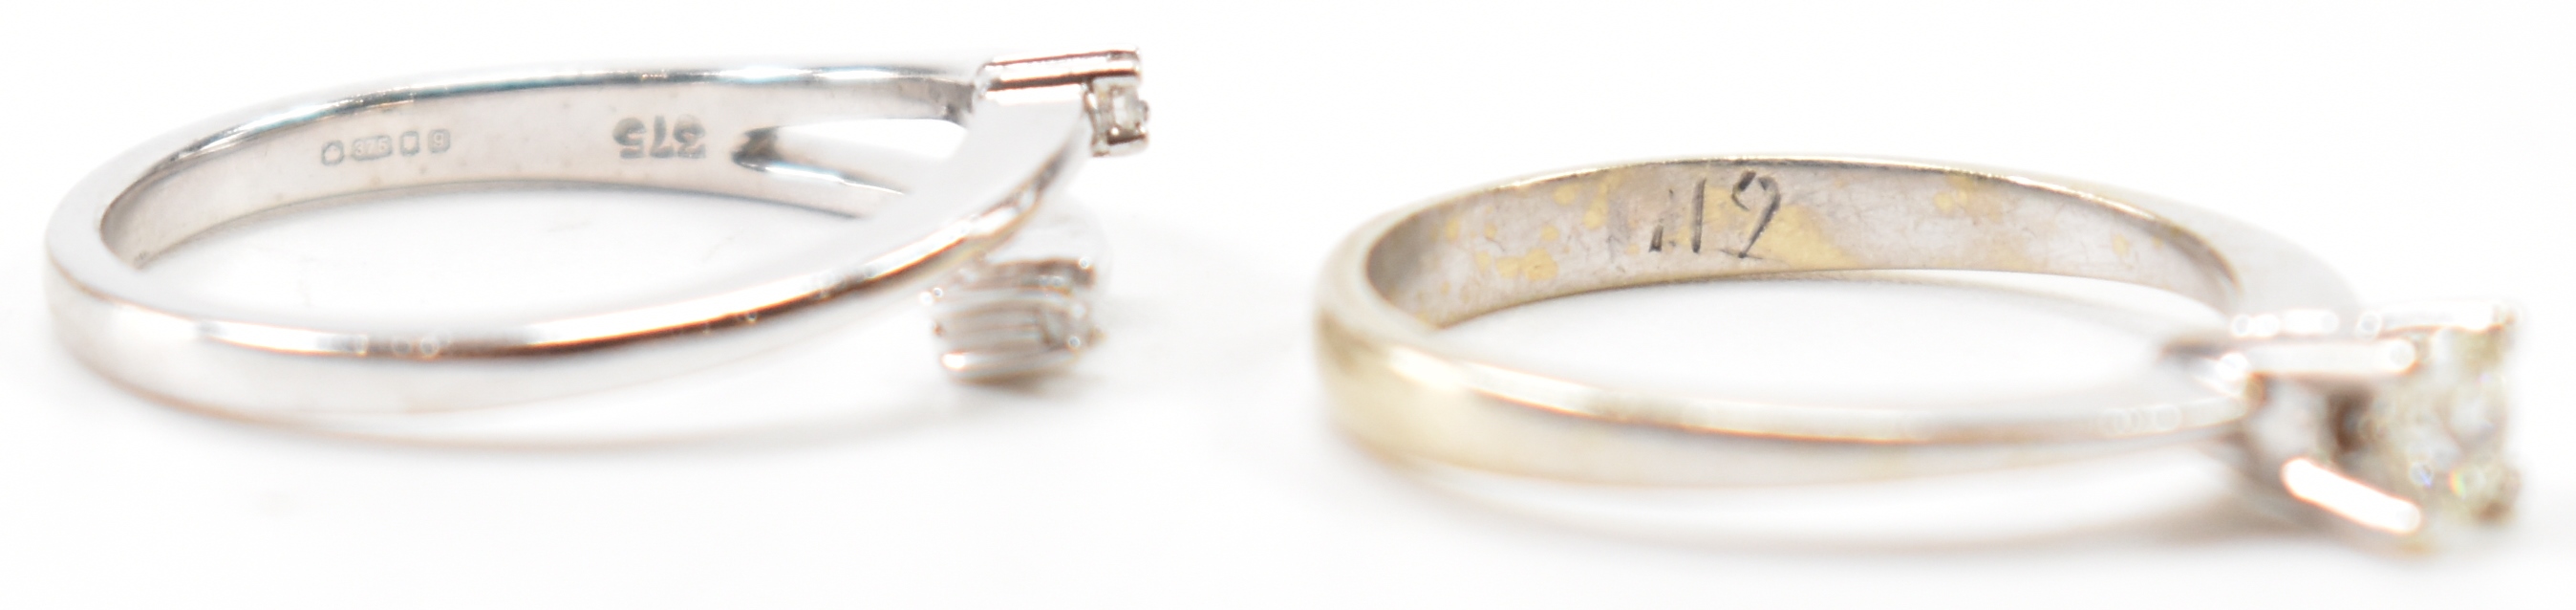 TWO 9CT GOLD & DIAMOND RINGS - Image 7 of 7